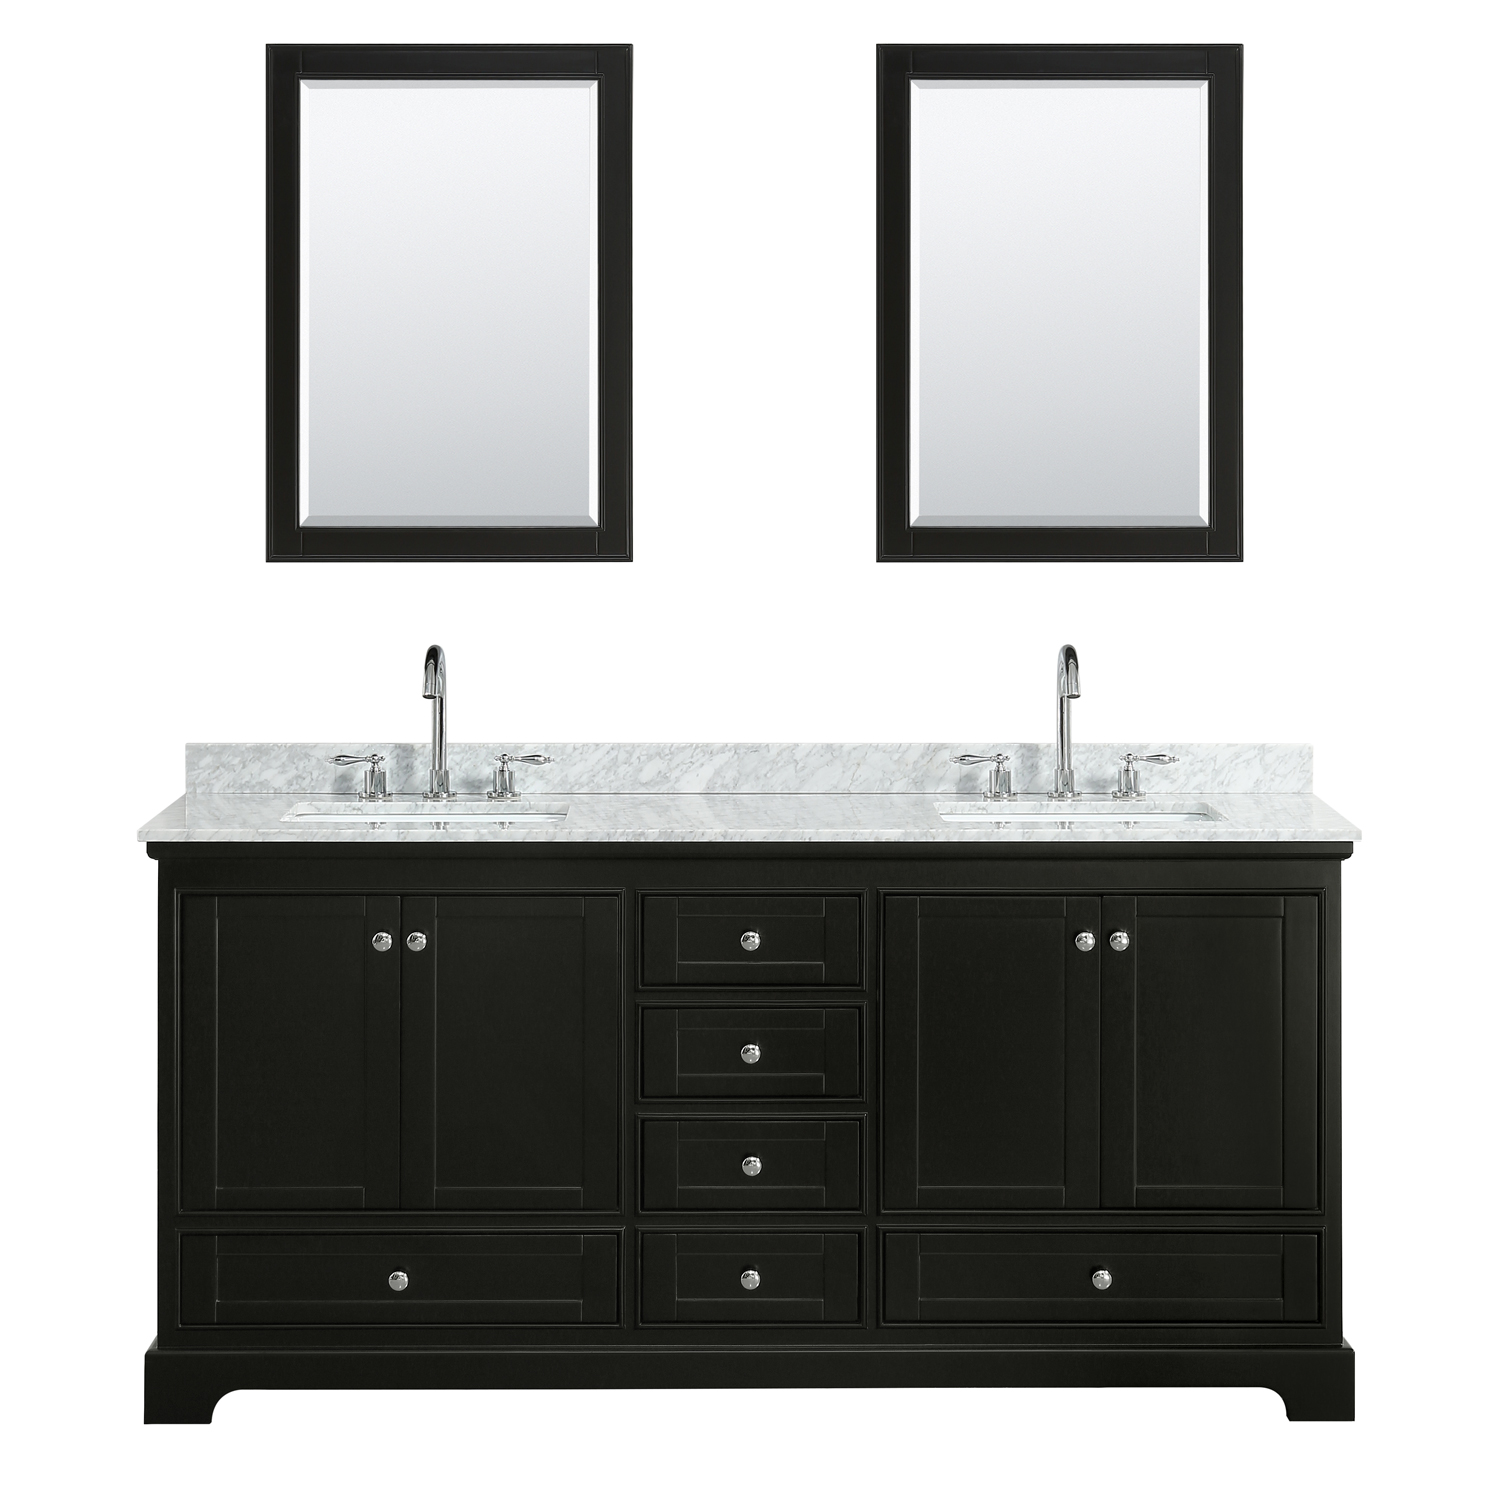 72" Double Bathroom Vanity in White Carrara Marble Countertop with Undermount Porcelain Sinks, Medicine Cabinet, Mirror and Color Options